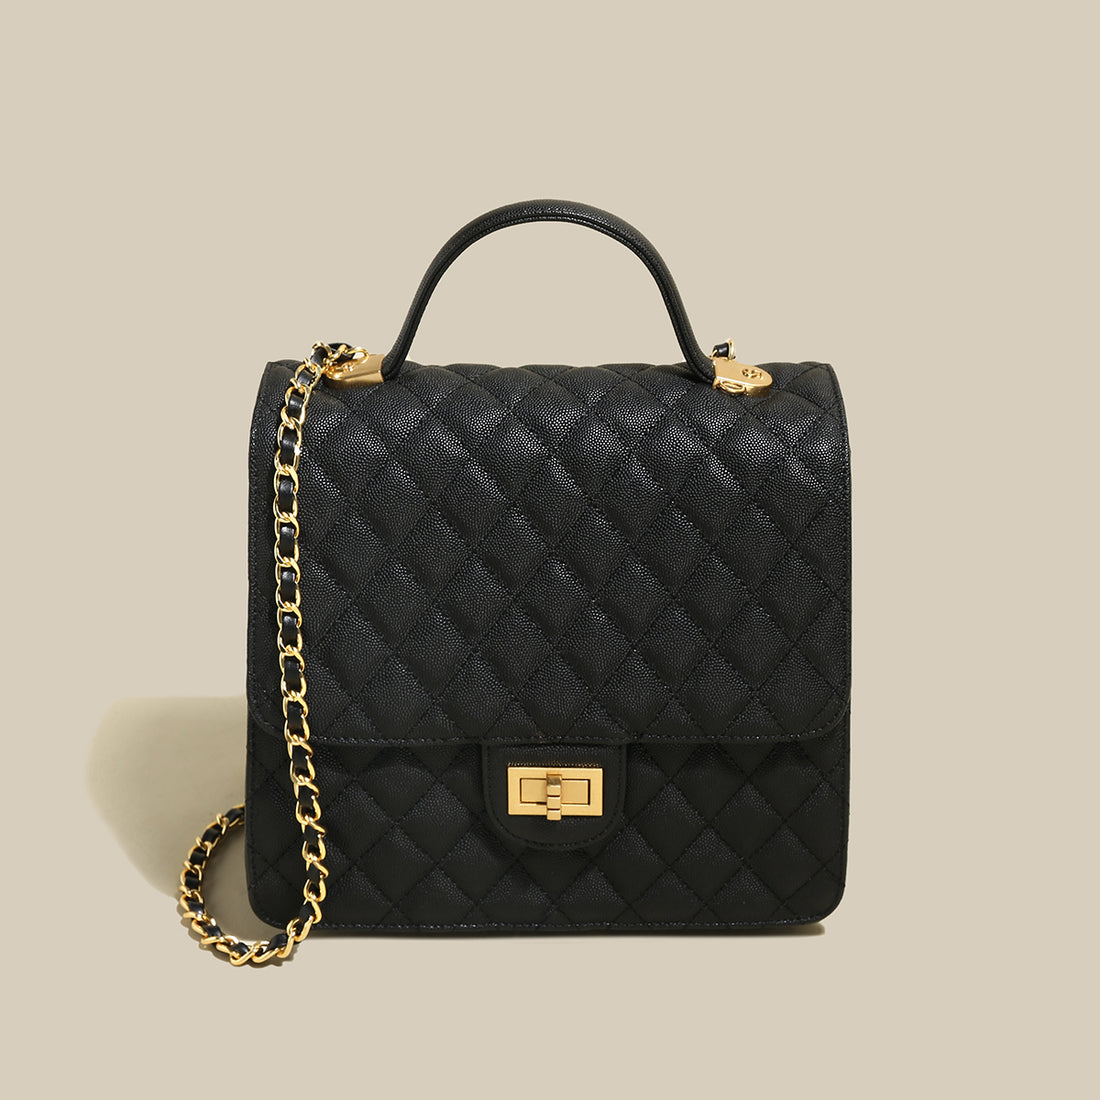 leather-chain-strap-black-quilted-flap-satchel-backpack_all_1.jpg